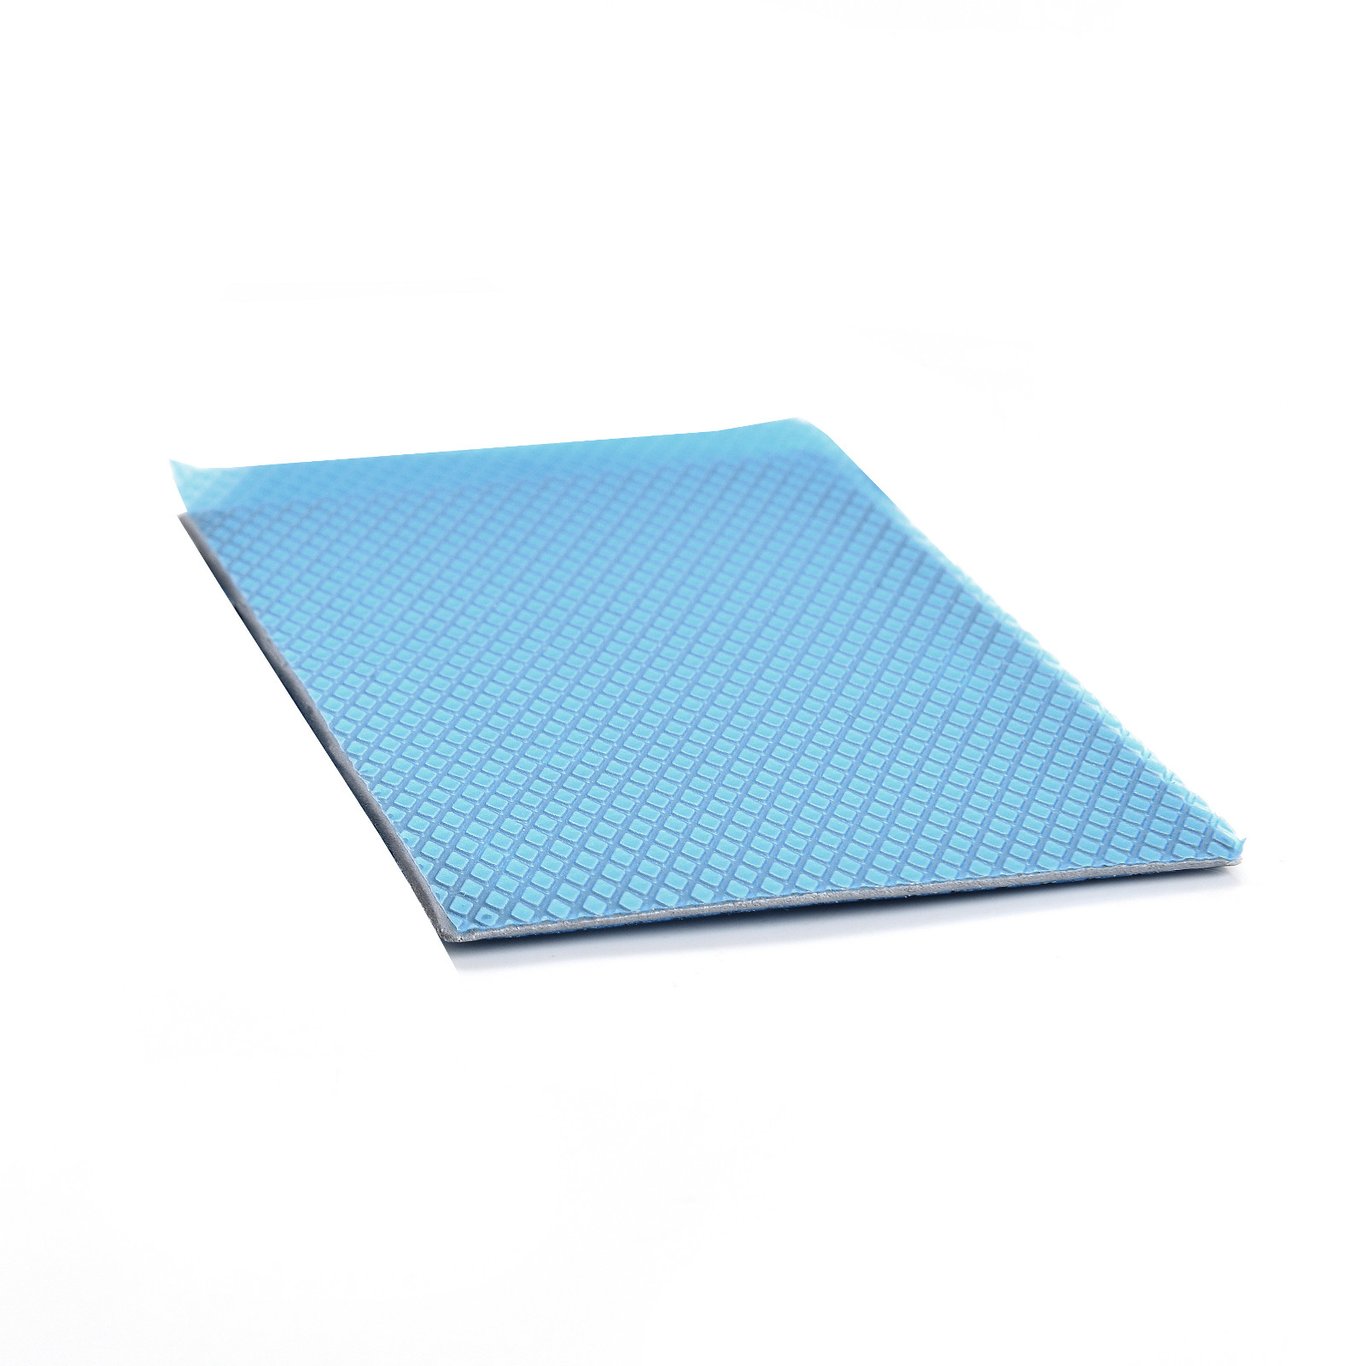 GELID solutions GP-ULTIMATE THERMAL PAD 散熱貼 (1.0mm)